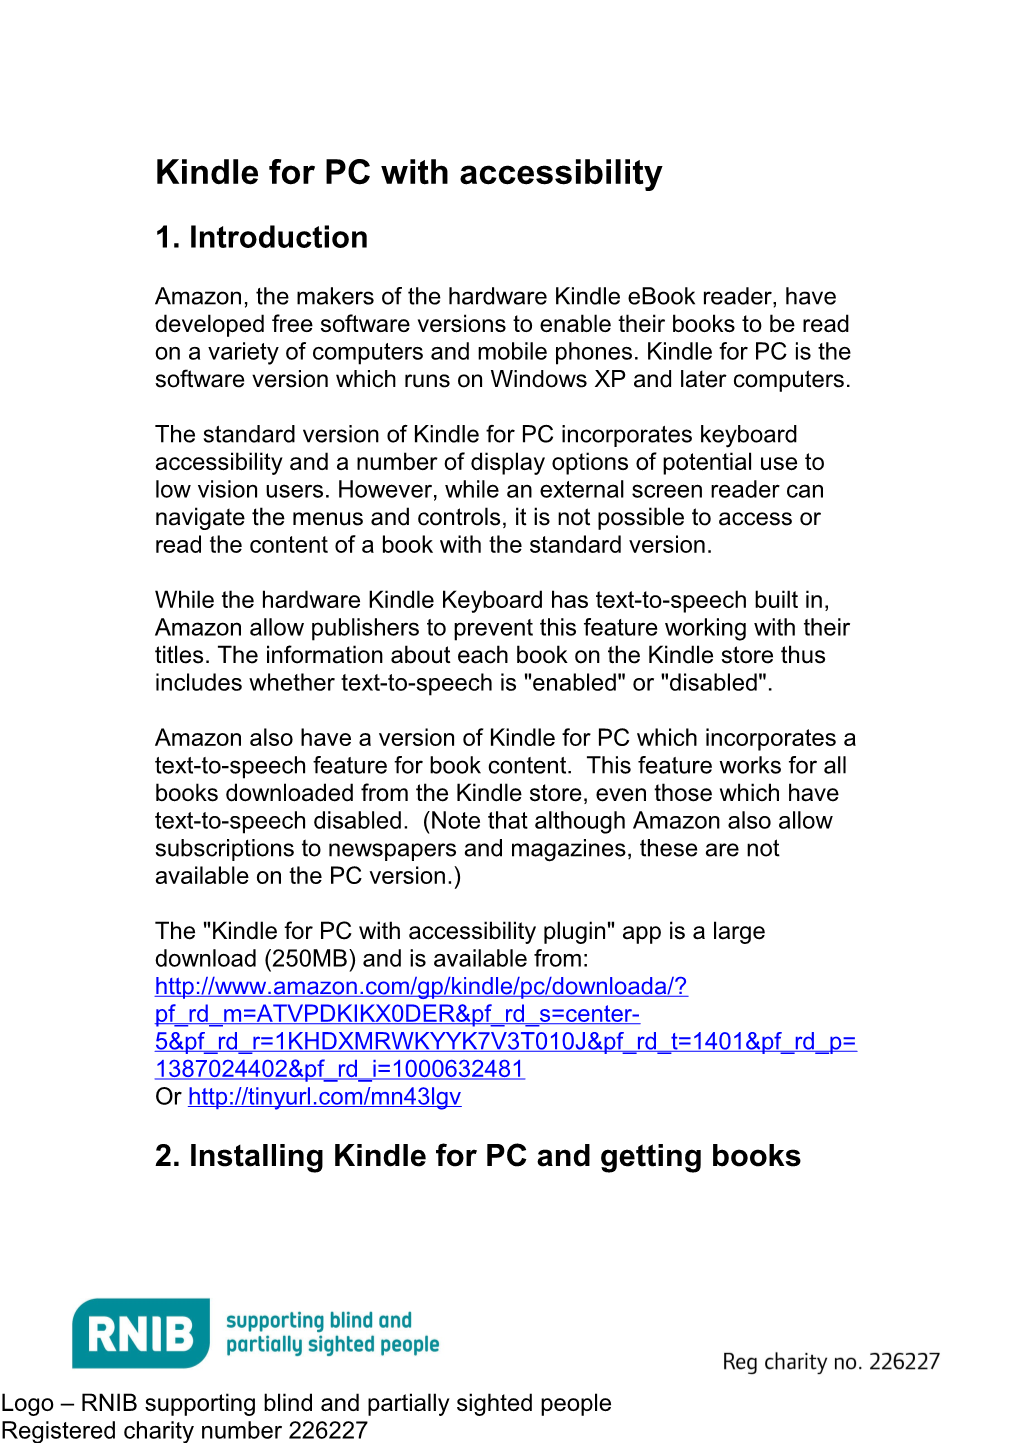 Kindle for PC with Accessibility